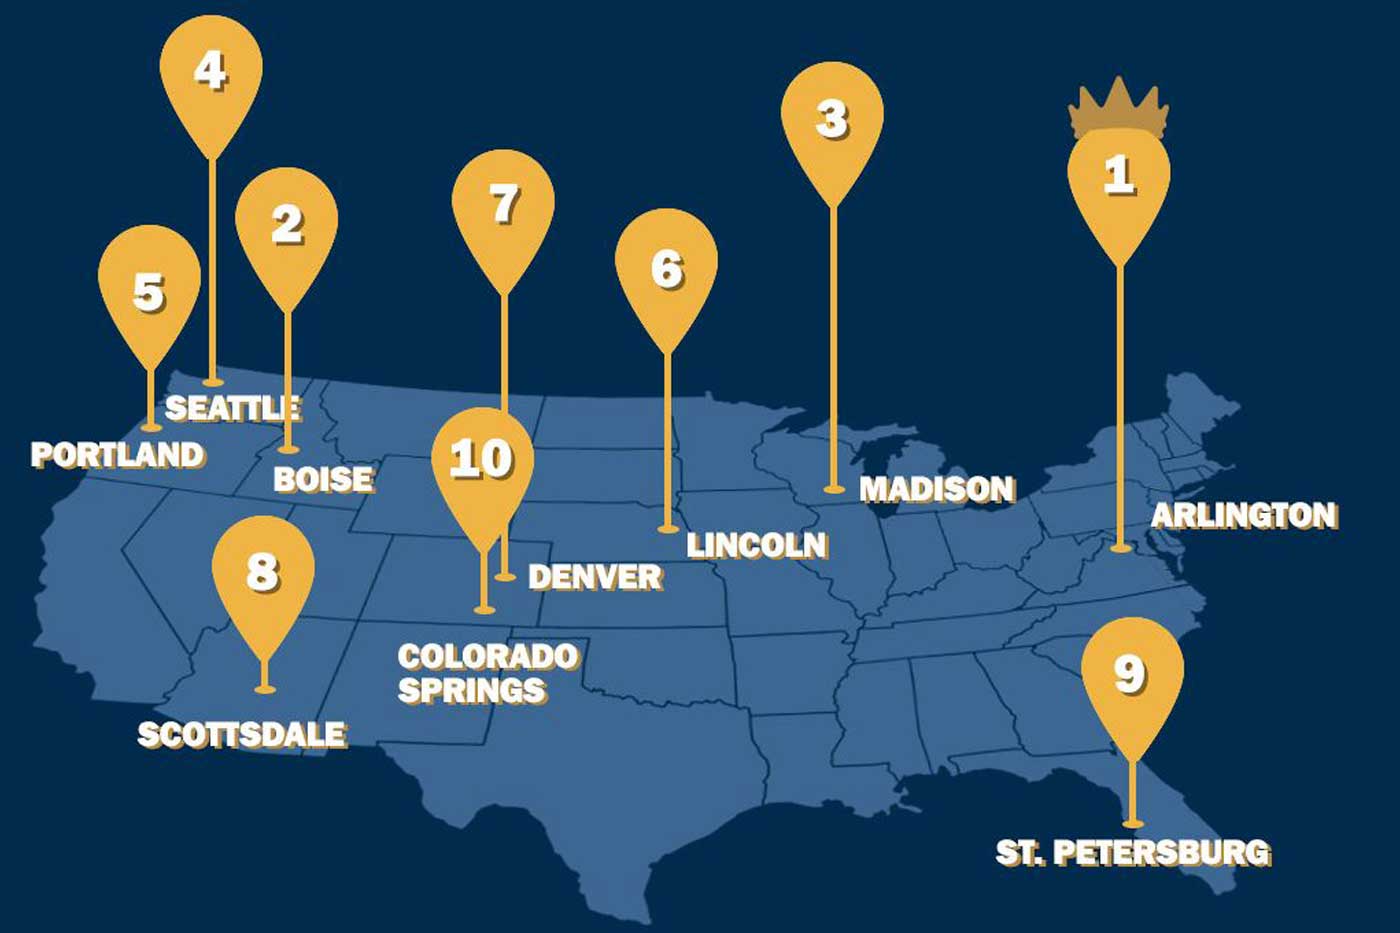 And America's Most-Handsome Cities Are...